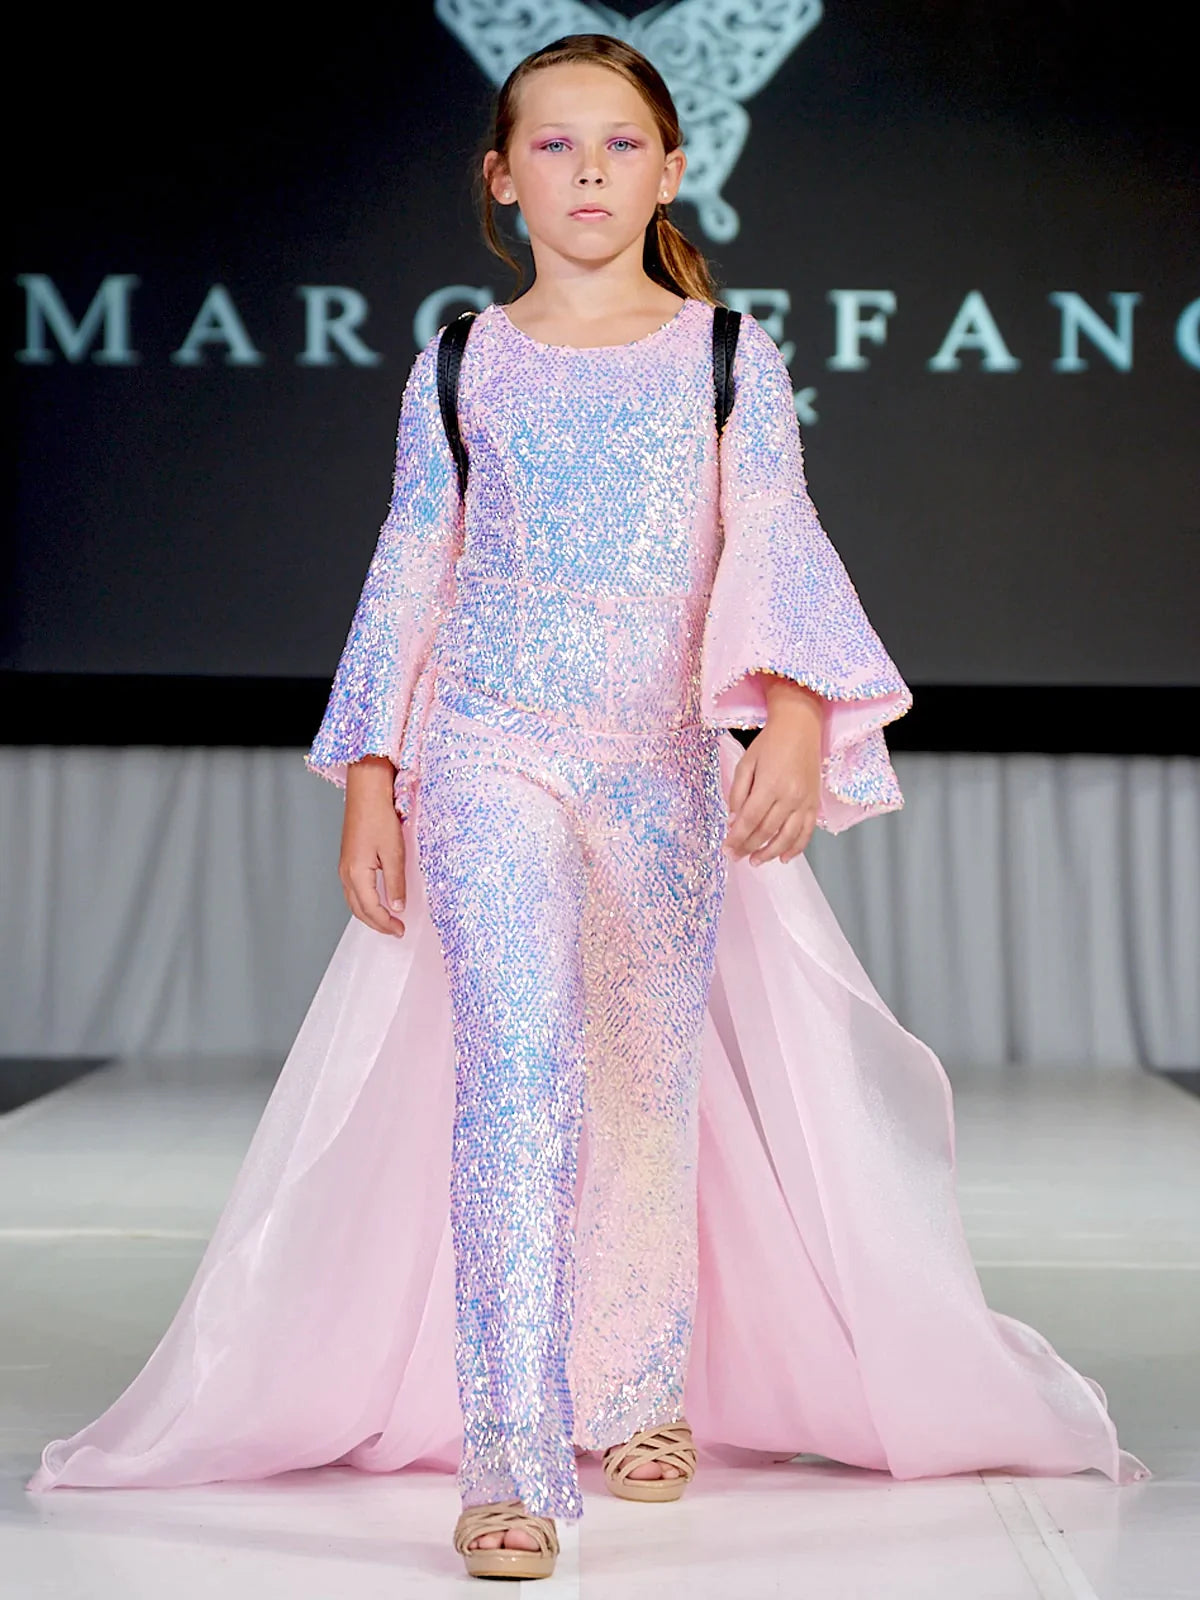 Marc Defang 8004K Sequin Bell Sleeve Pageant Jumpsuit Overskirt Fun Fashion   Price is inclusive of overskirt  Fully beaded jumpsuit Bell sleeve Option of matching overskirt Knitted inner comfort lining  Available Sizes: 4-14  Available Colors: Baby Pink, Light Purple, Light Orange, Mint